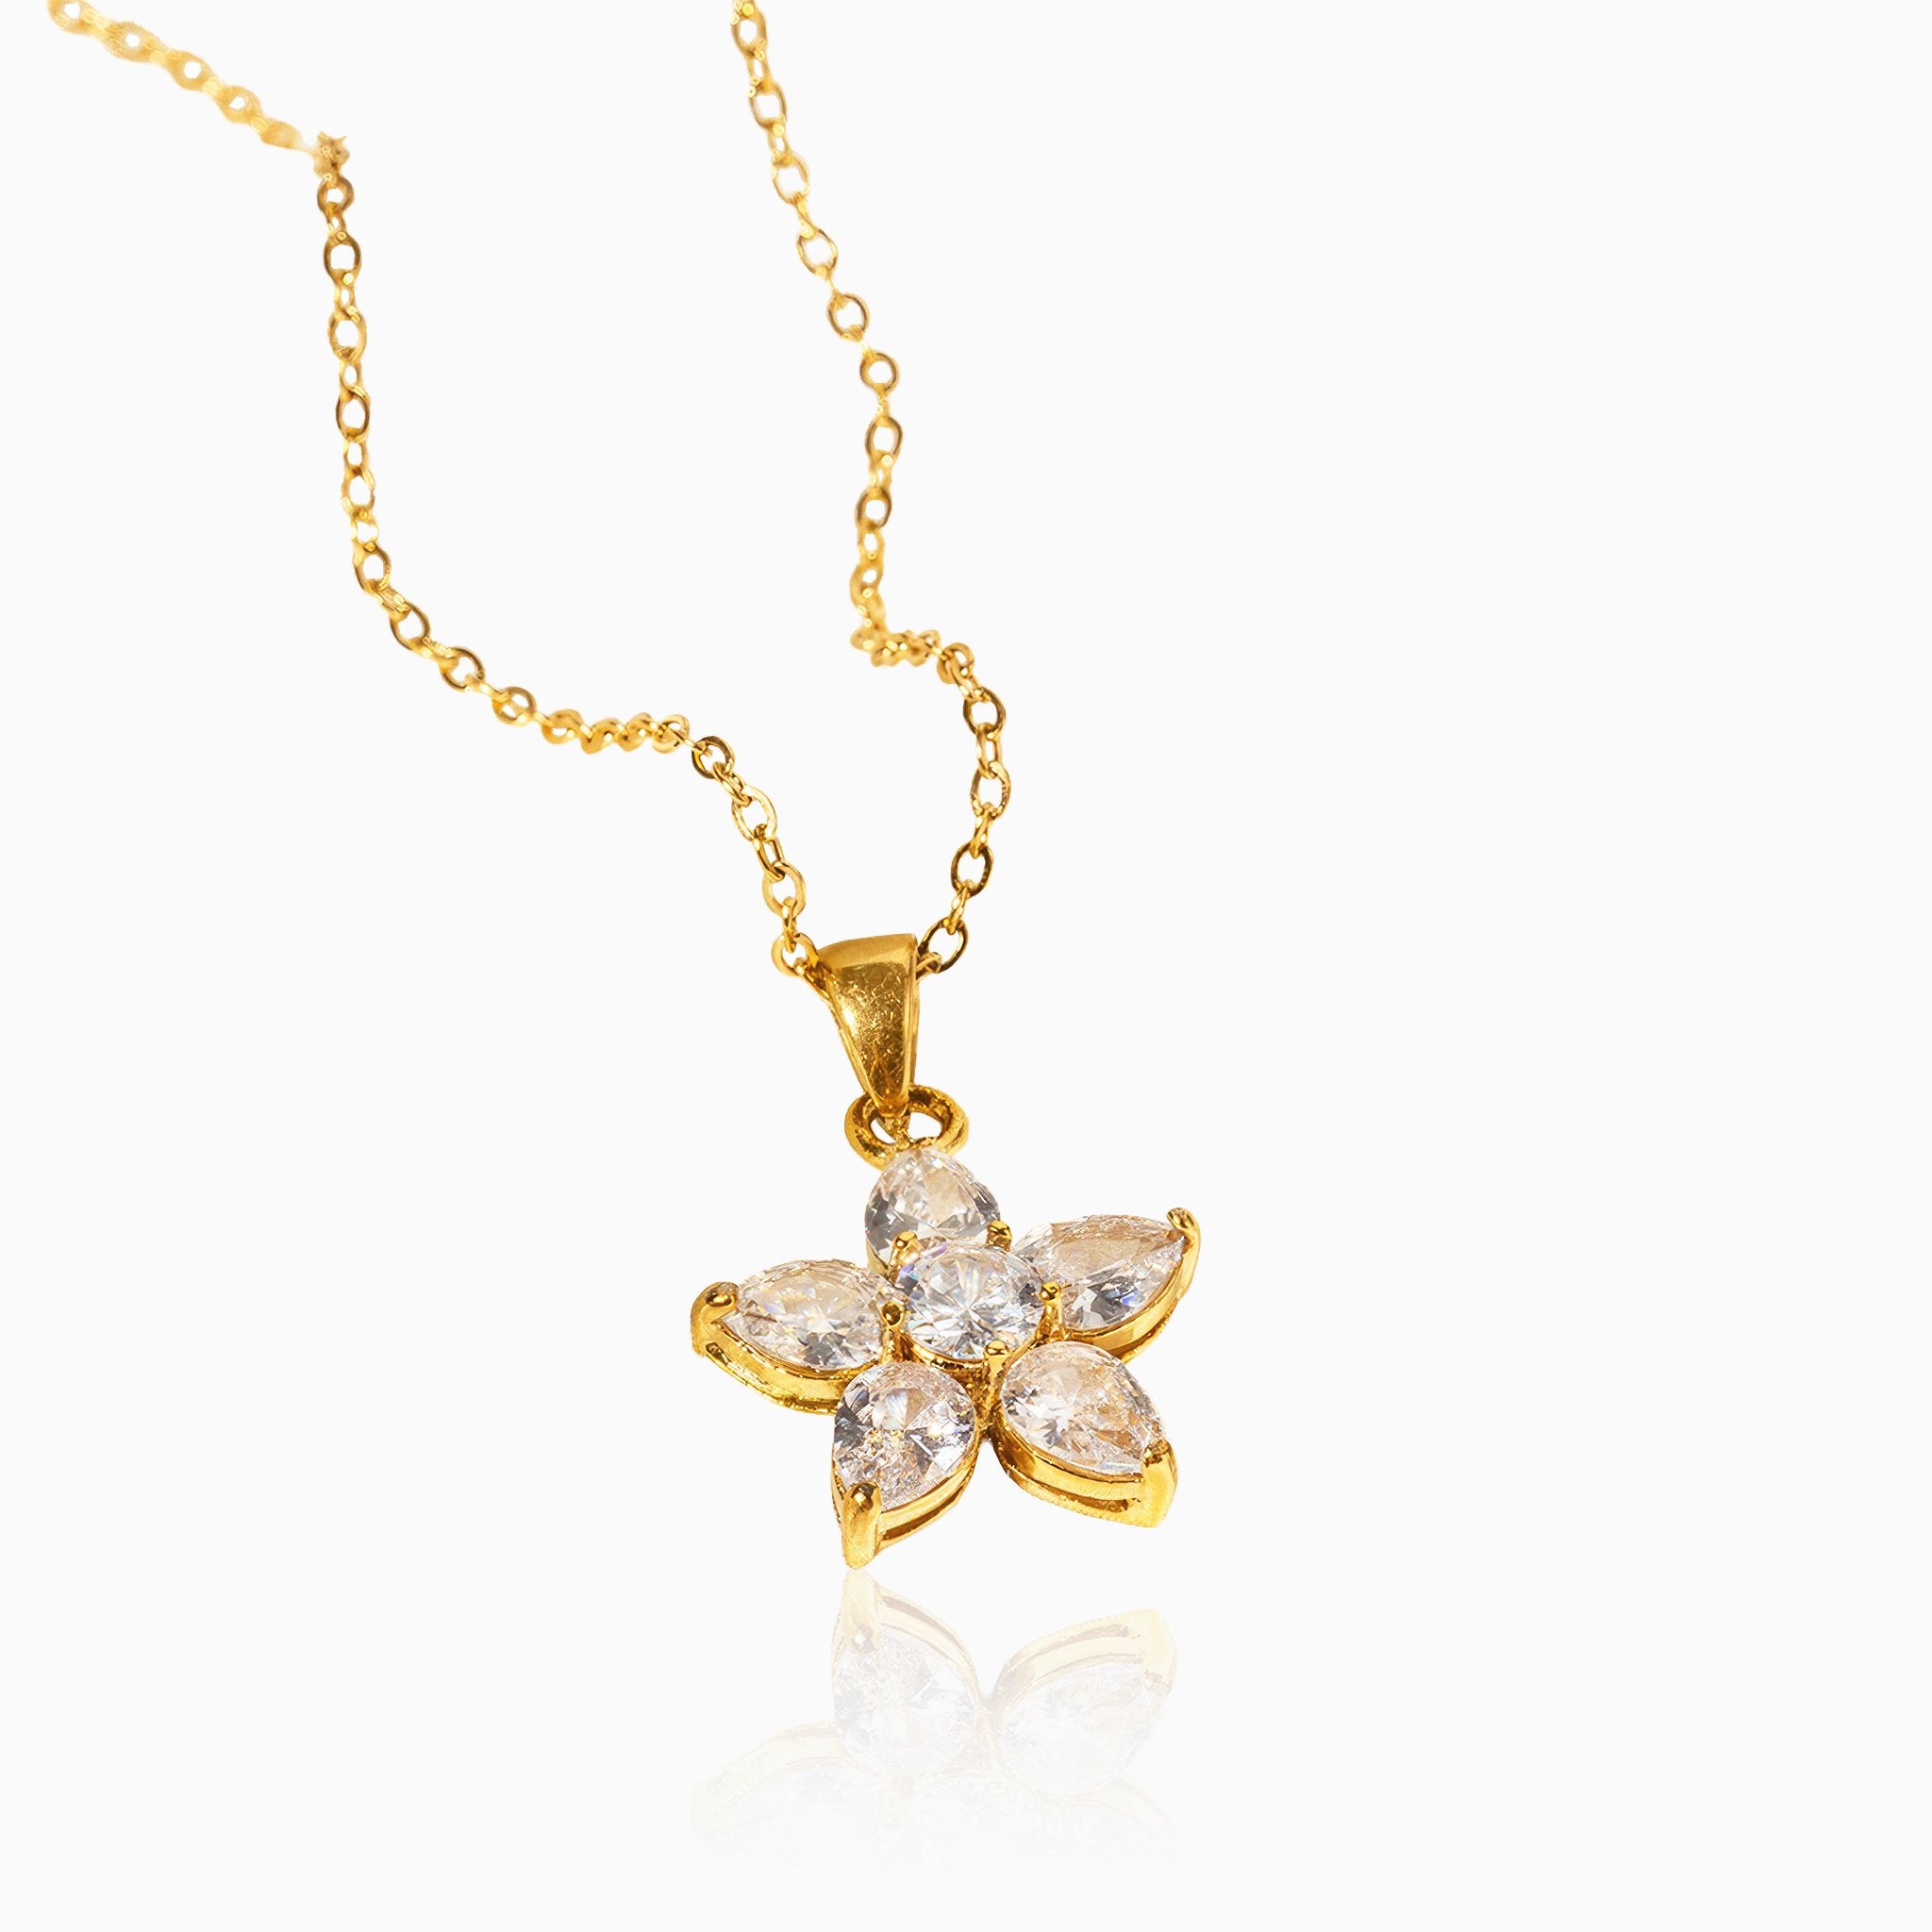 Five Petal Flower Pendant Necklace - Nobbier - Necklace - 18K Gold And Titanium PVD Coated Jewelry